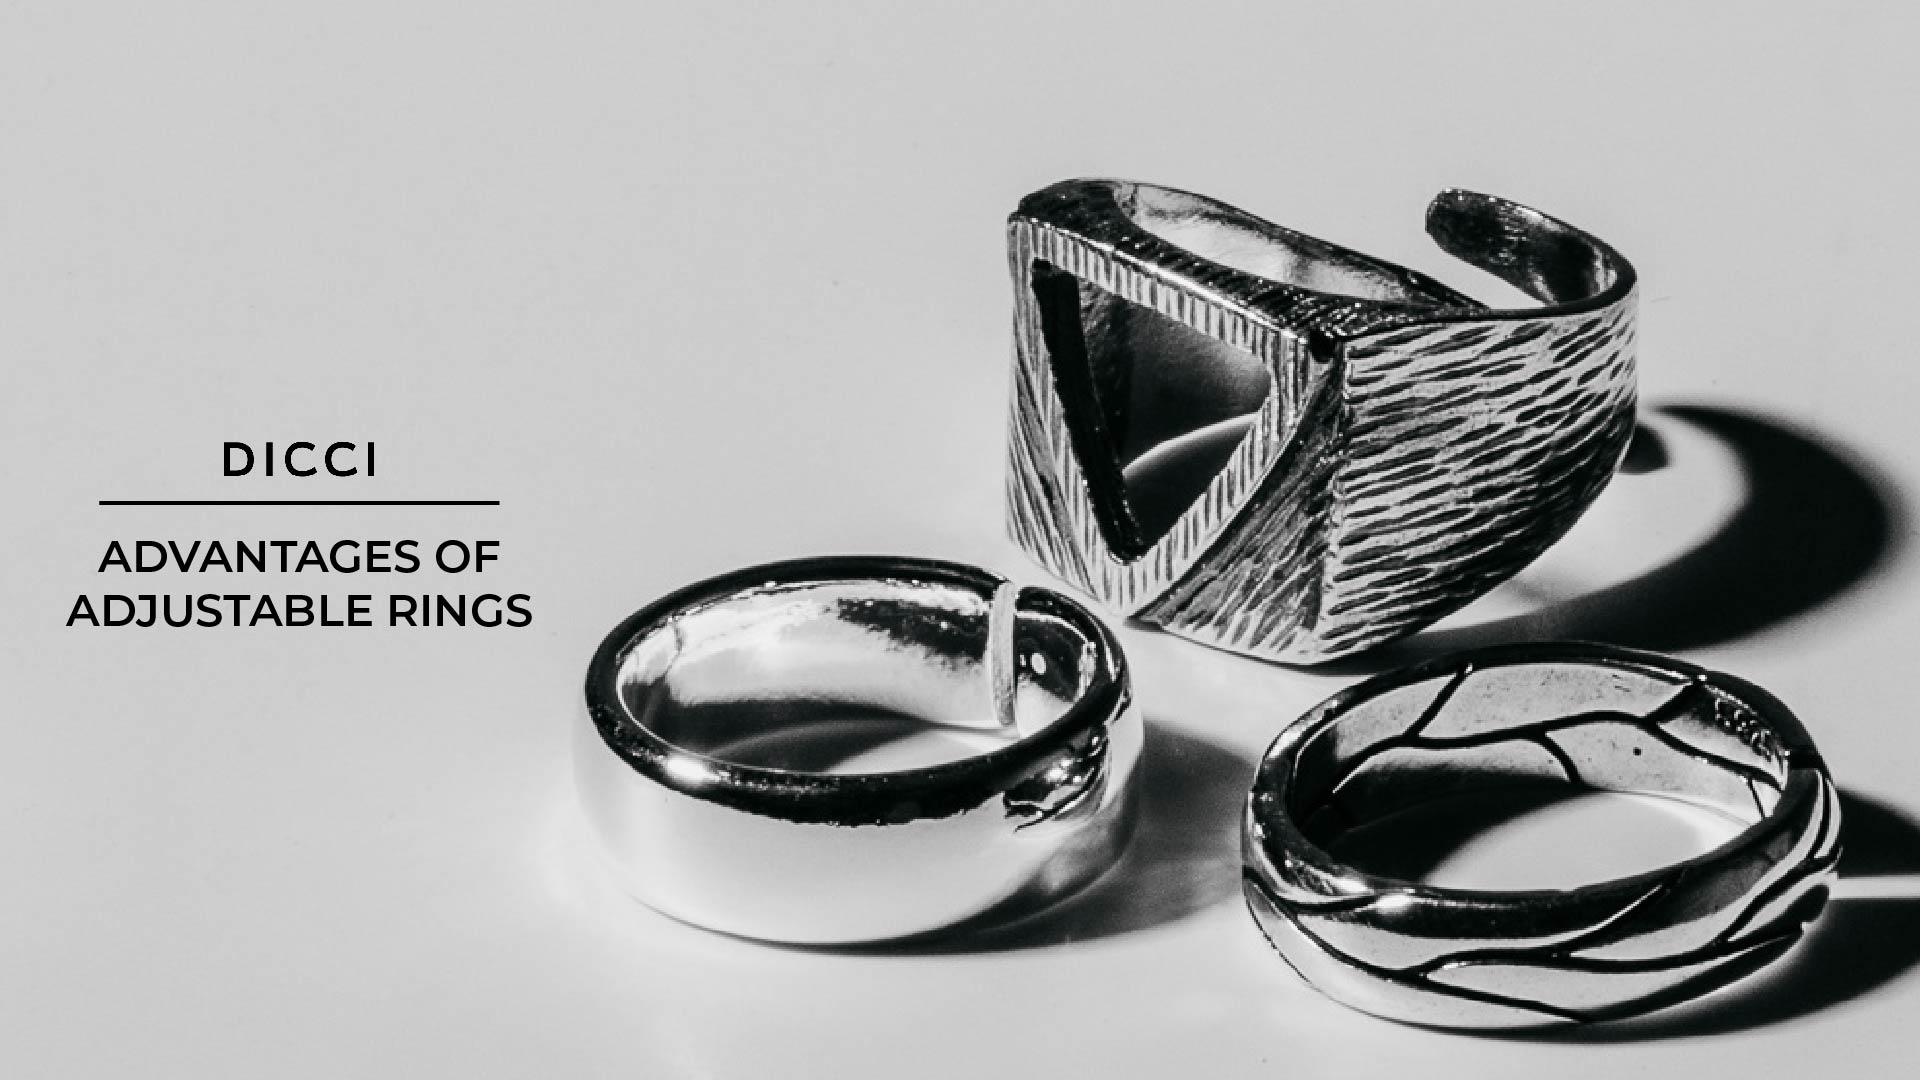 Advantages of adjustable rings - Journal - Dicci – DICCI